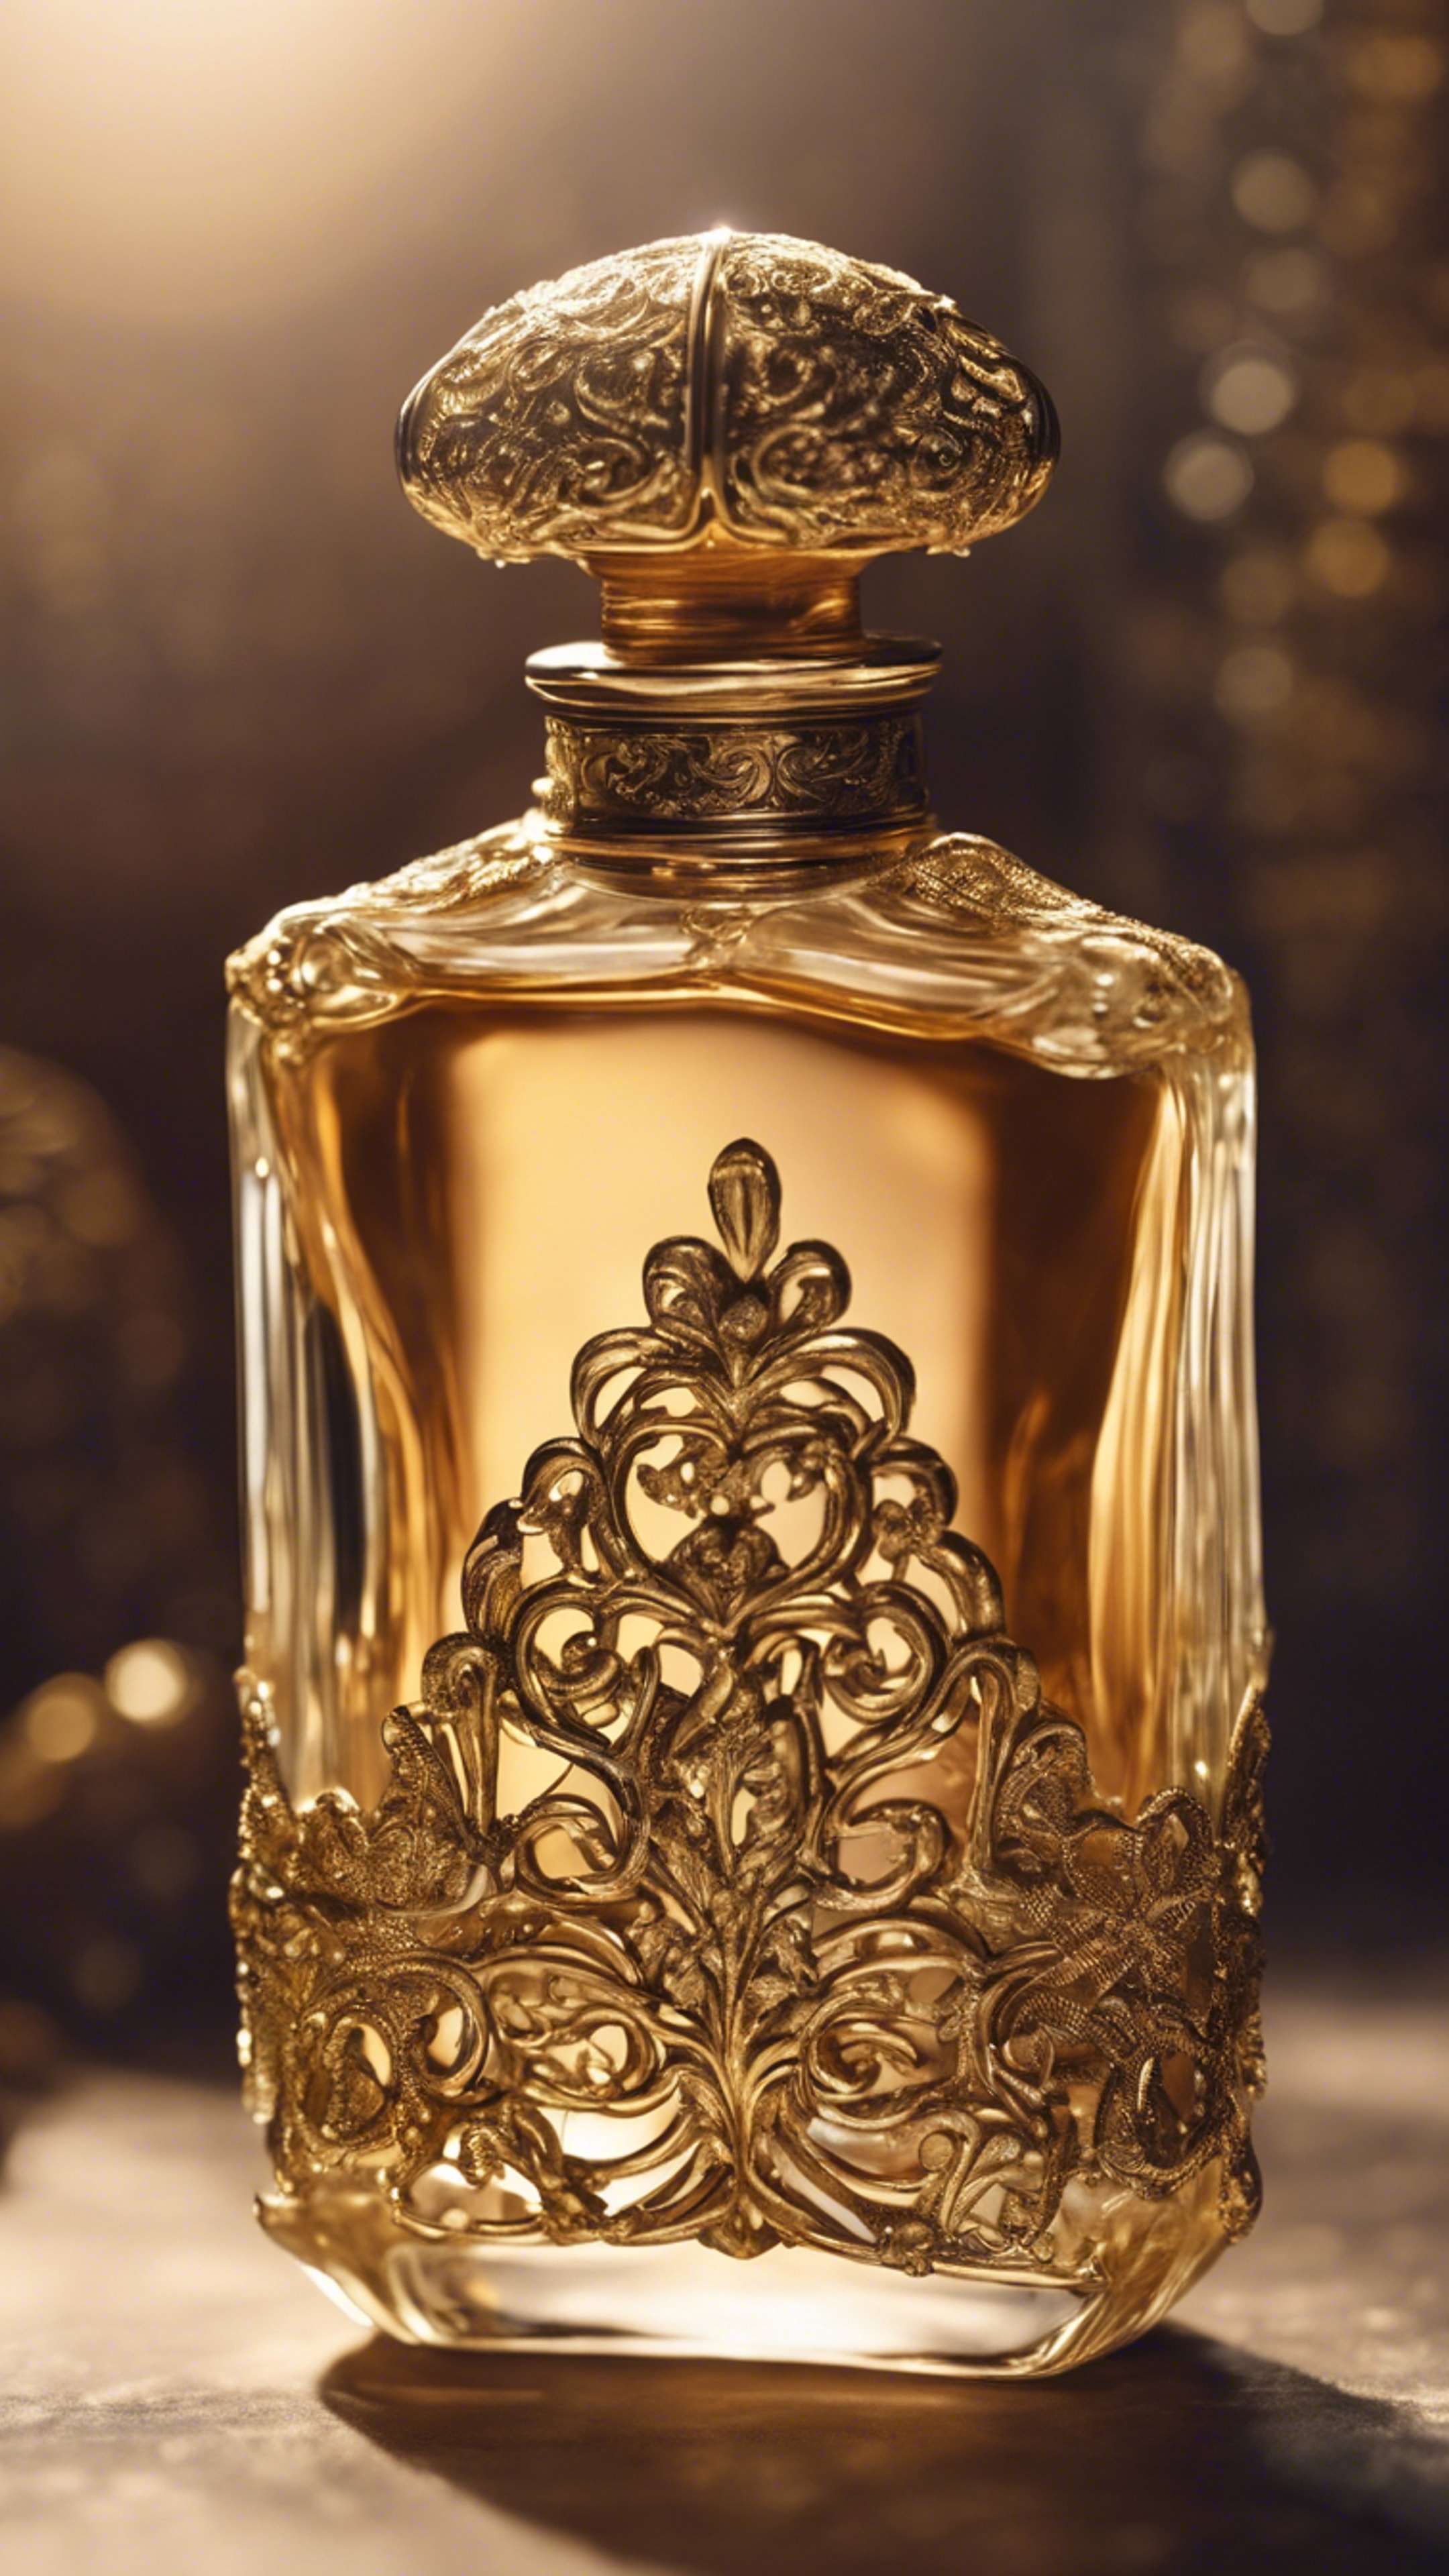 An antique perfume bottle with delicate gold filigree luxury cosmetic item. Tapeta na zeď[fe361f22190a4891a6d9]